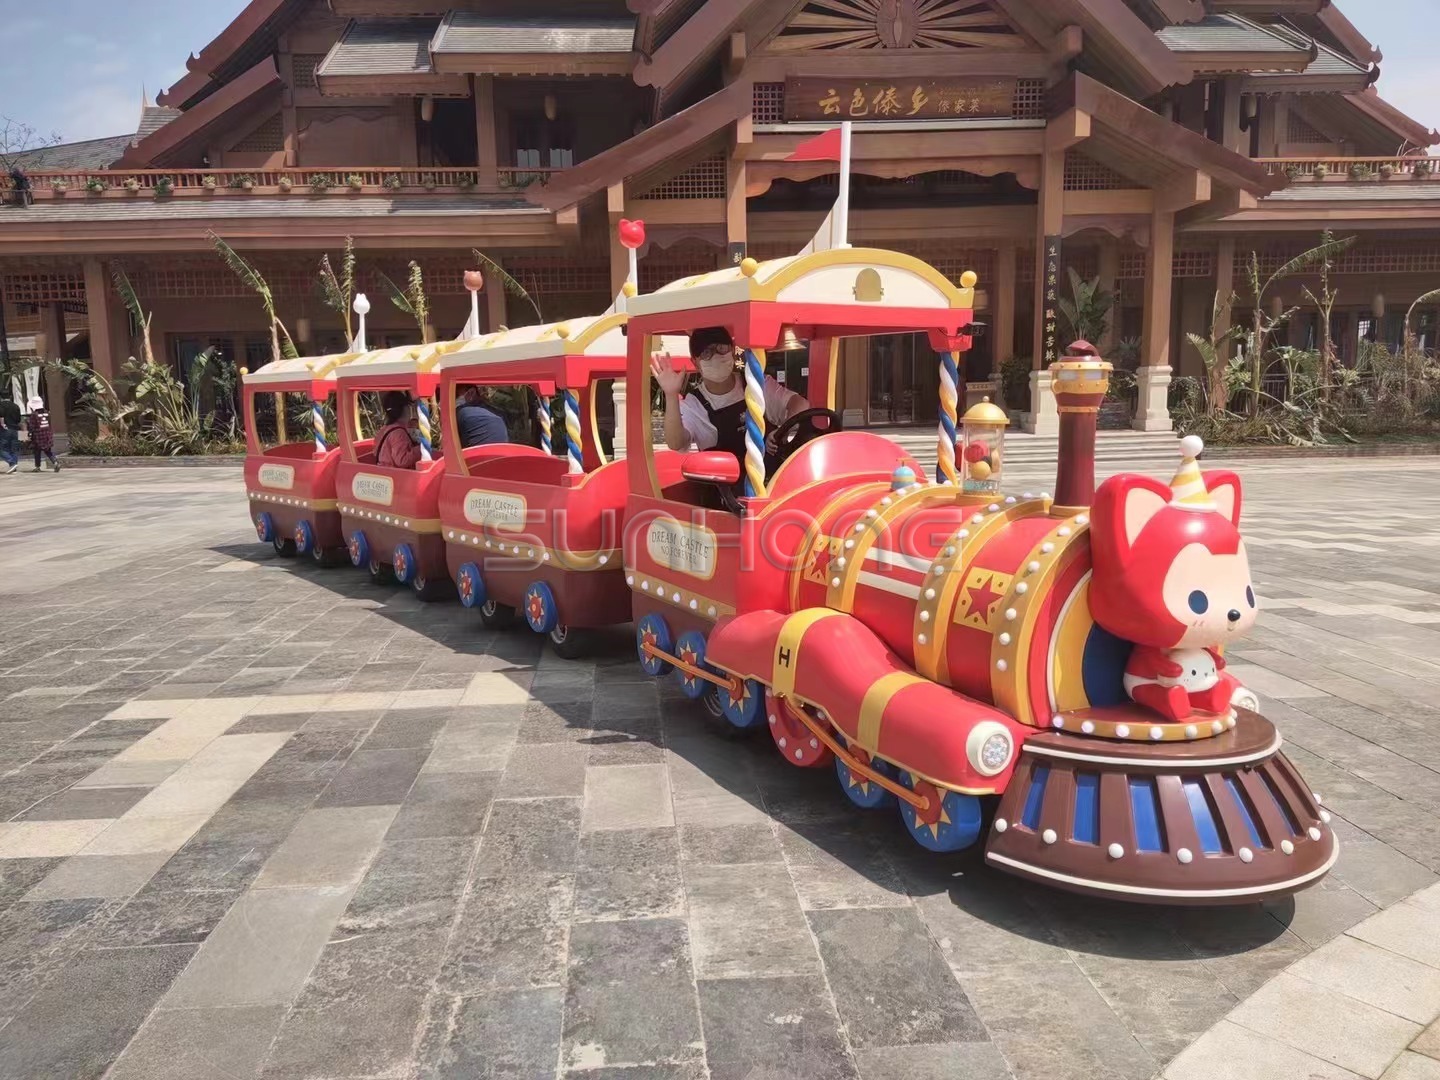 trackless sightseeing train from China